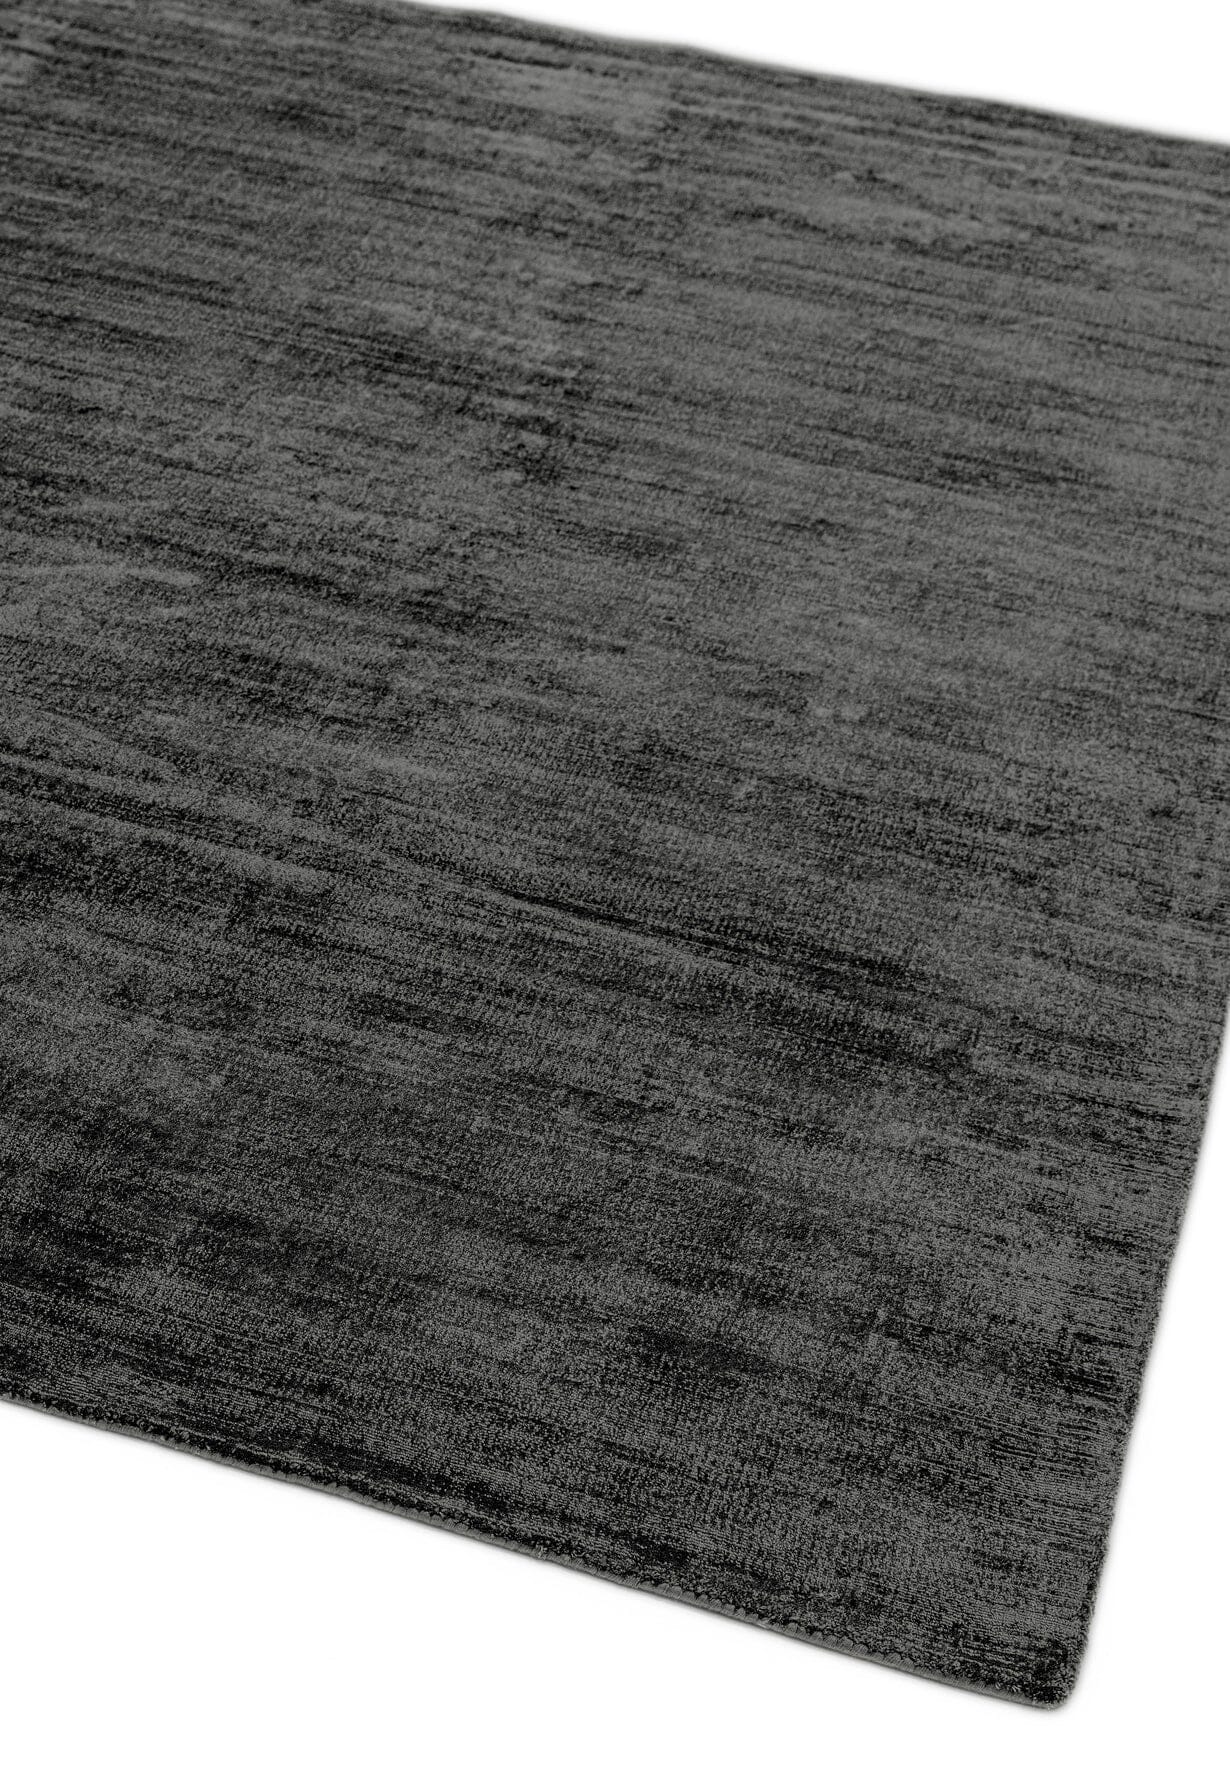  Asiatic Carpets-Asiatic Carpets Blade Hand Woven Rug Charcoal - 120 x 170cm-Grey, Silver 813 